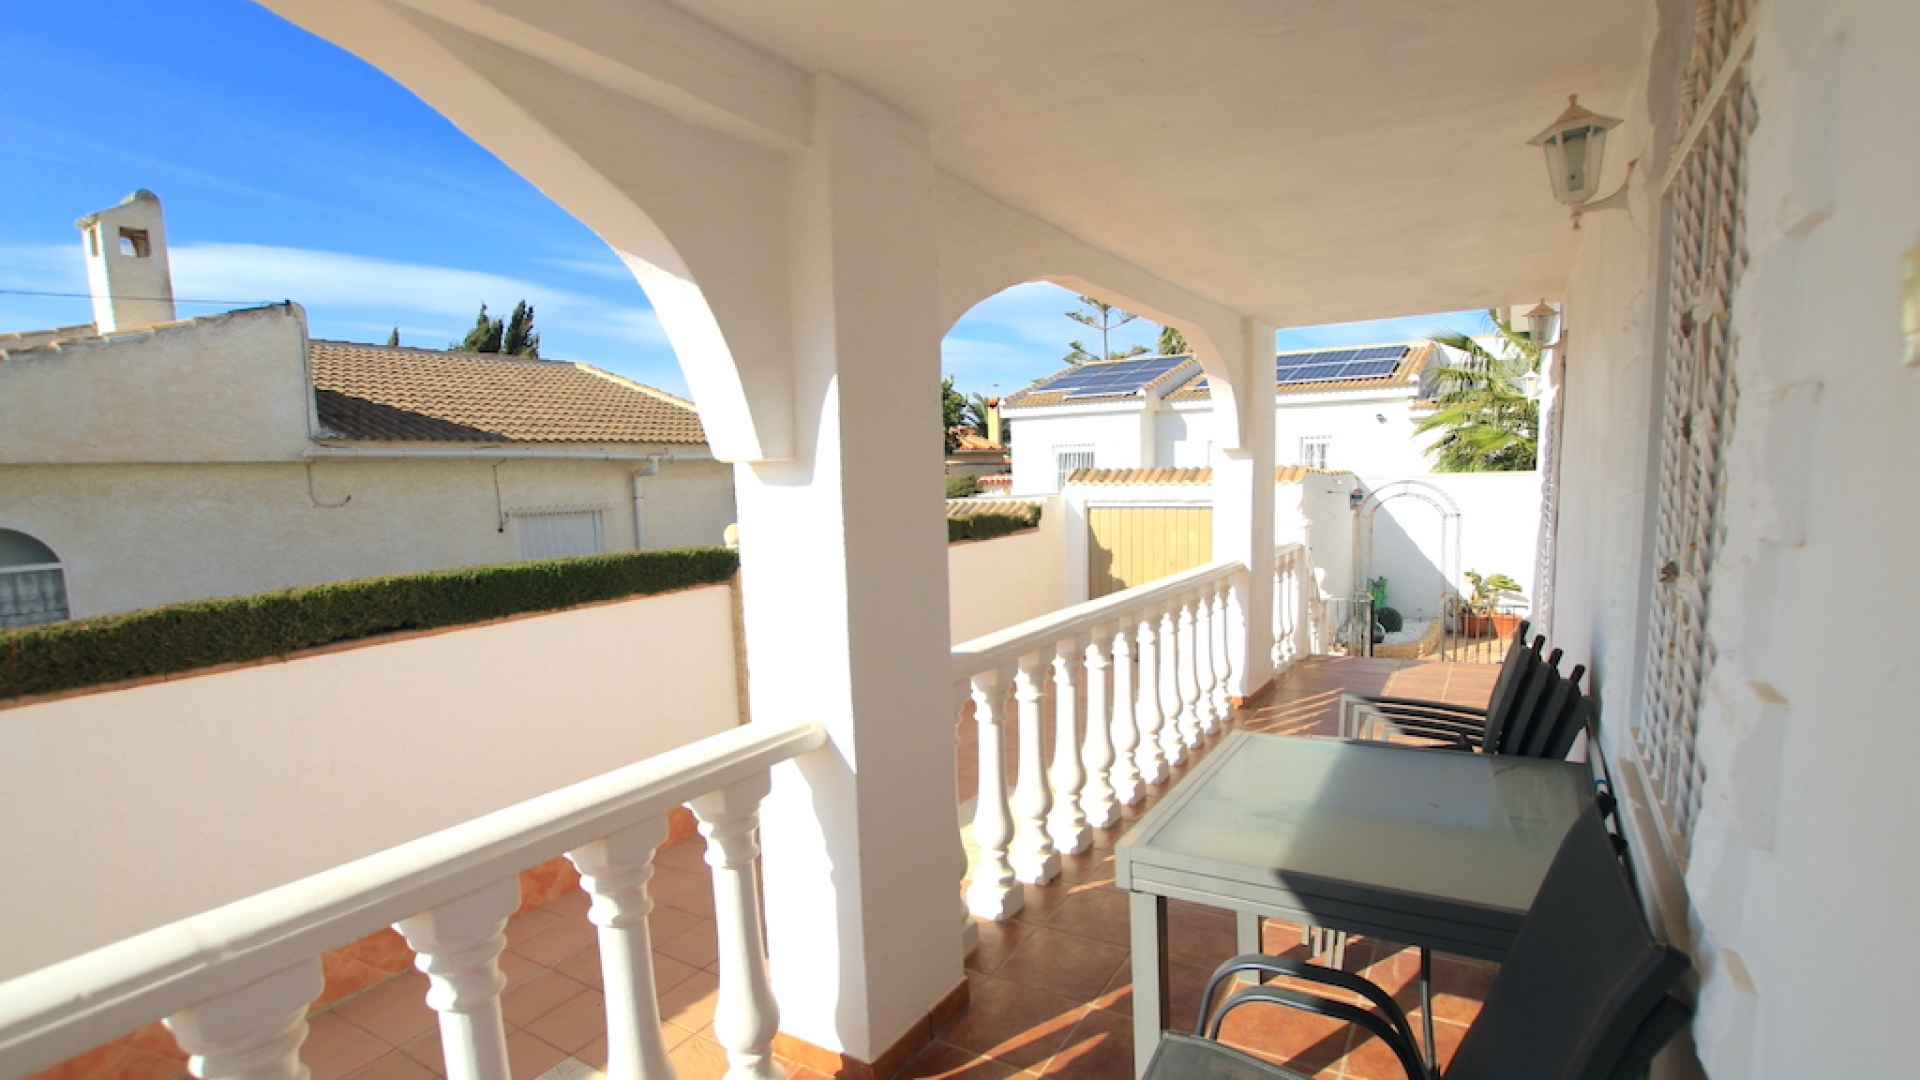 48358_expansive_4_bed_detached_villa_with_private_pool_and_garage_220224130513_img_7449